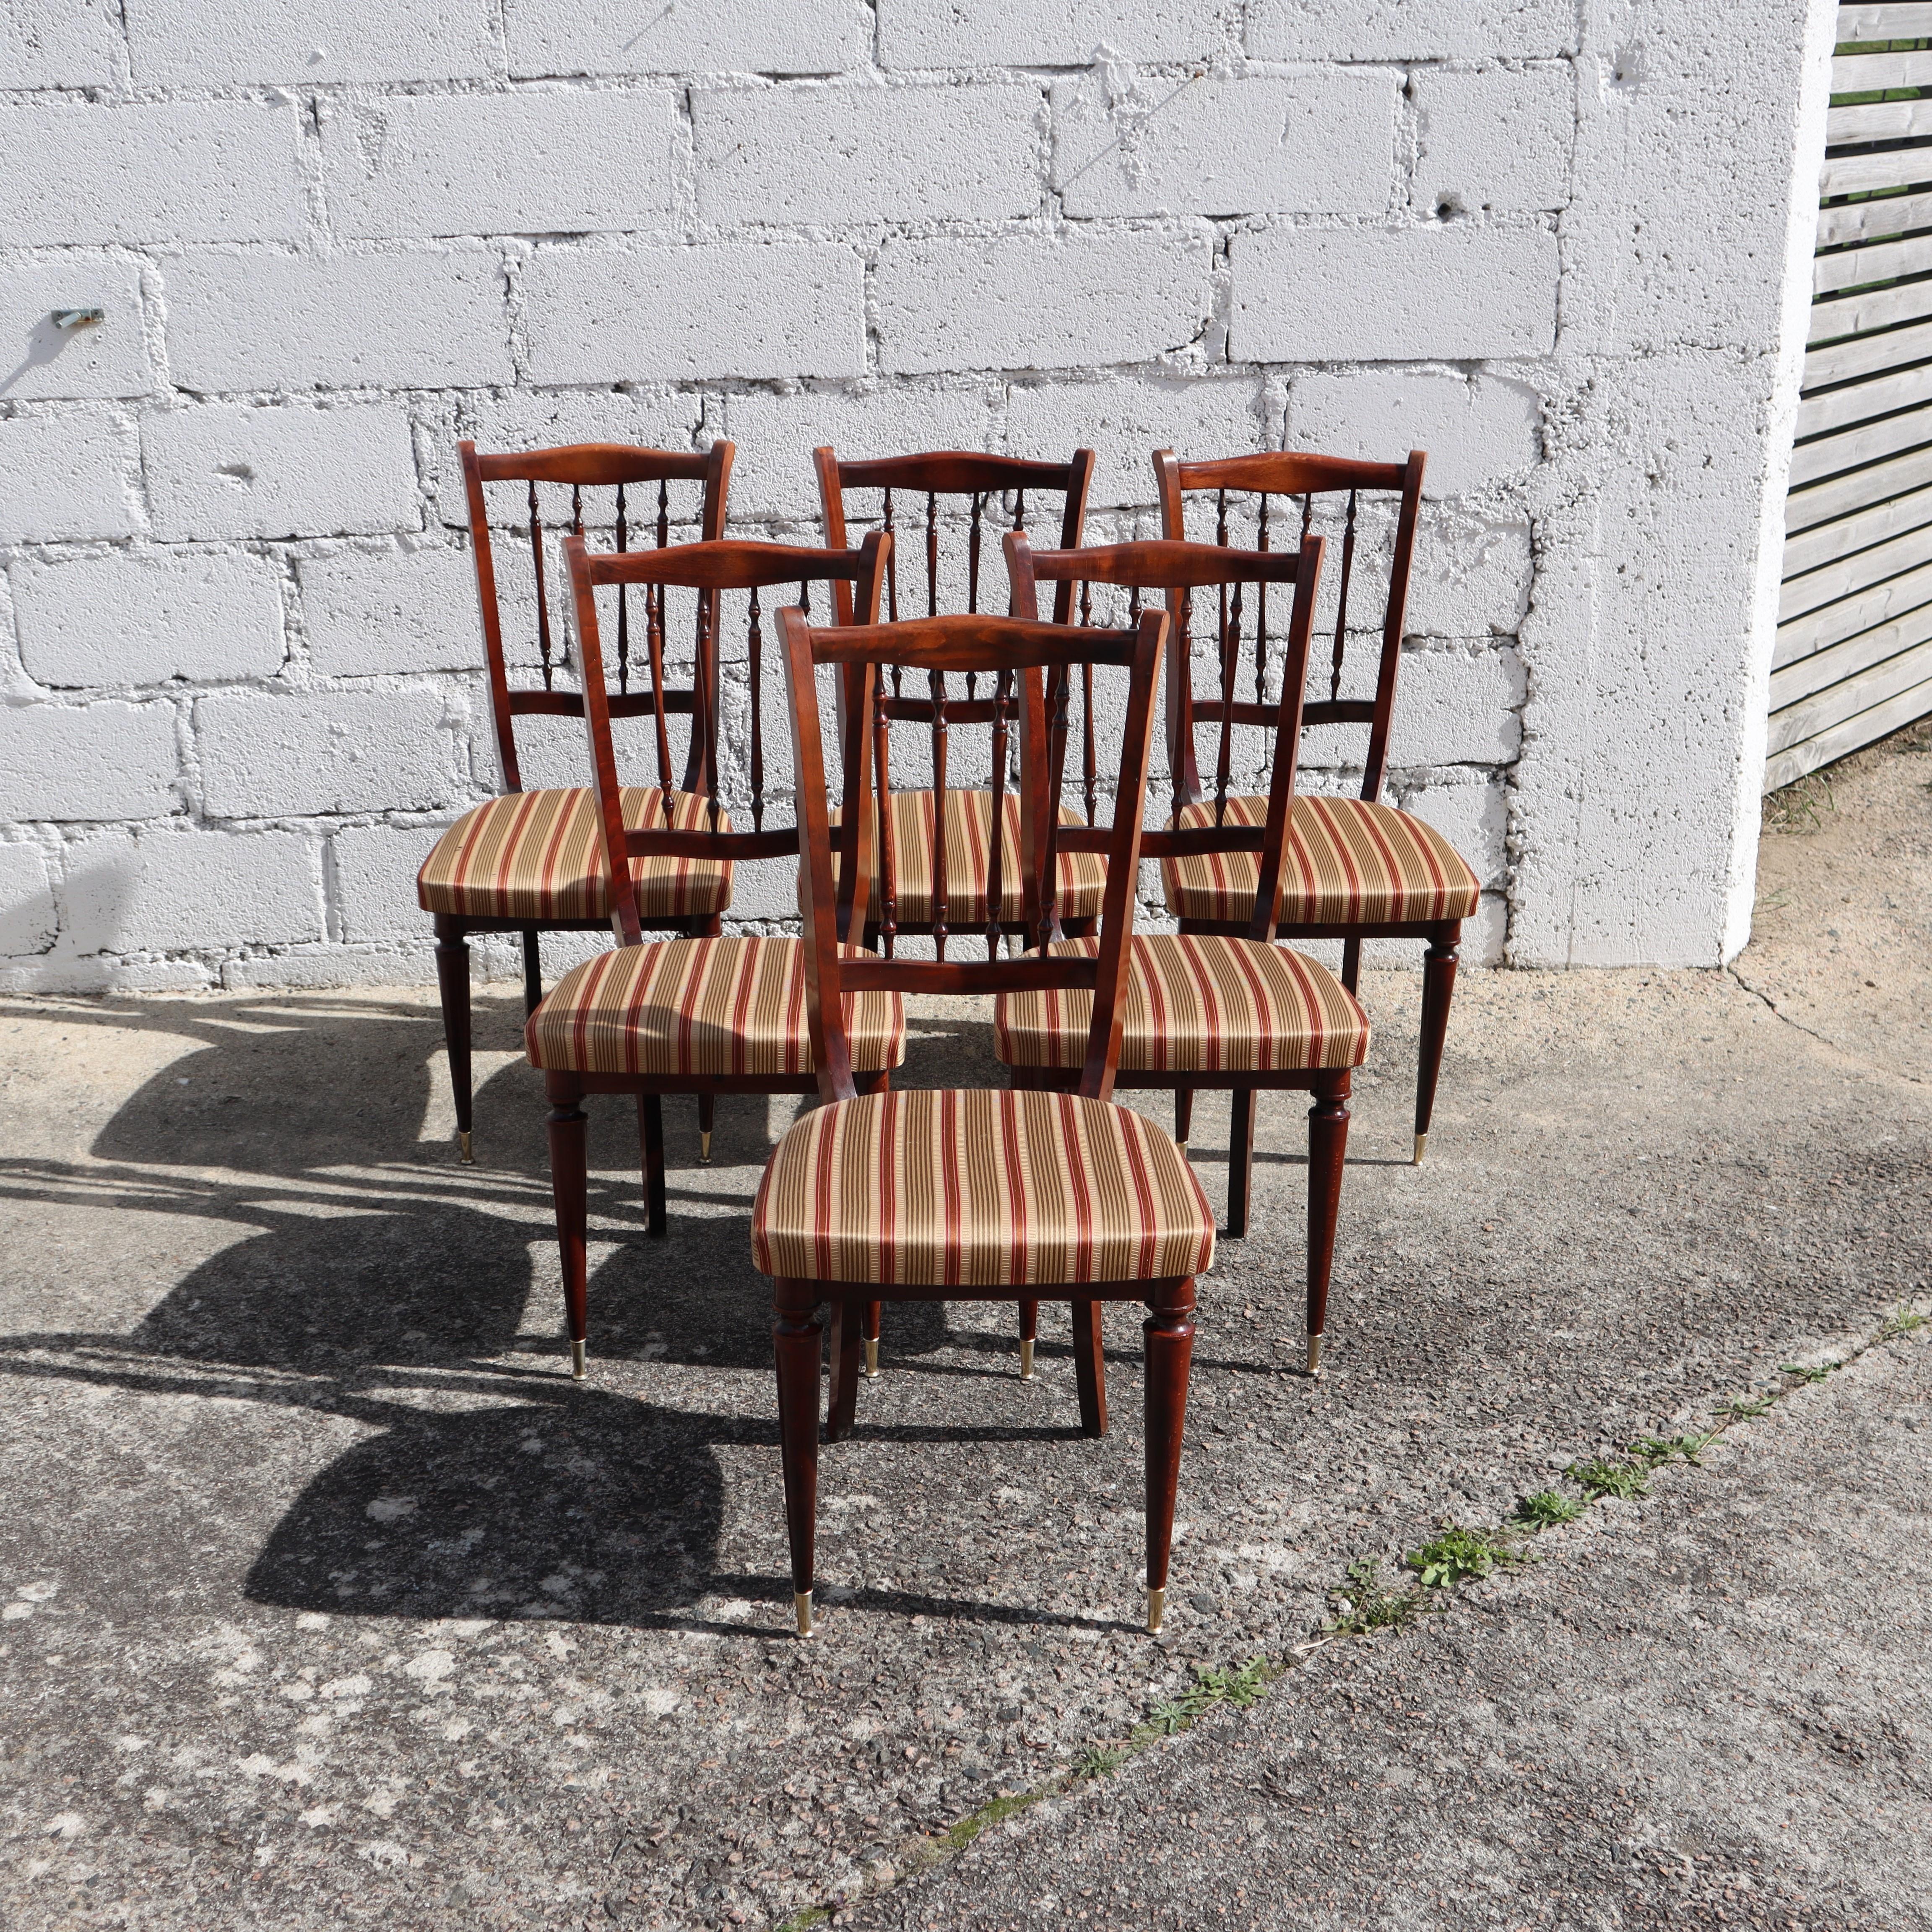 Wonderful Set of 6 elegant Mahogany Dining Chairs - 60s
Solidly constructed Chairs - Seats are firm-with striped fabric covers in a metallic effect
A wonderful in combination with our offered Dining Tables
very nice vintage condition : seat covers